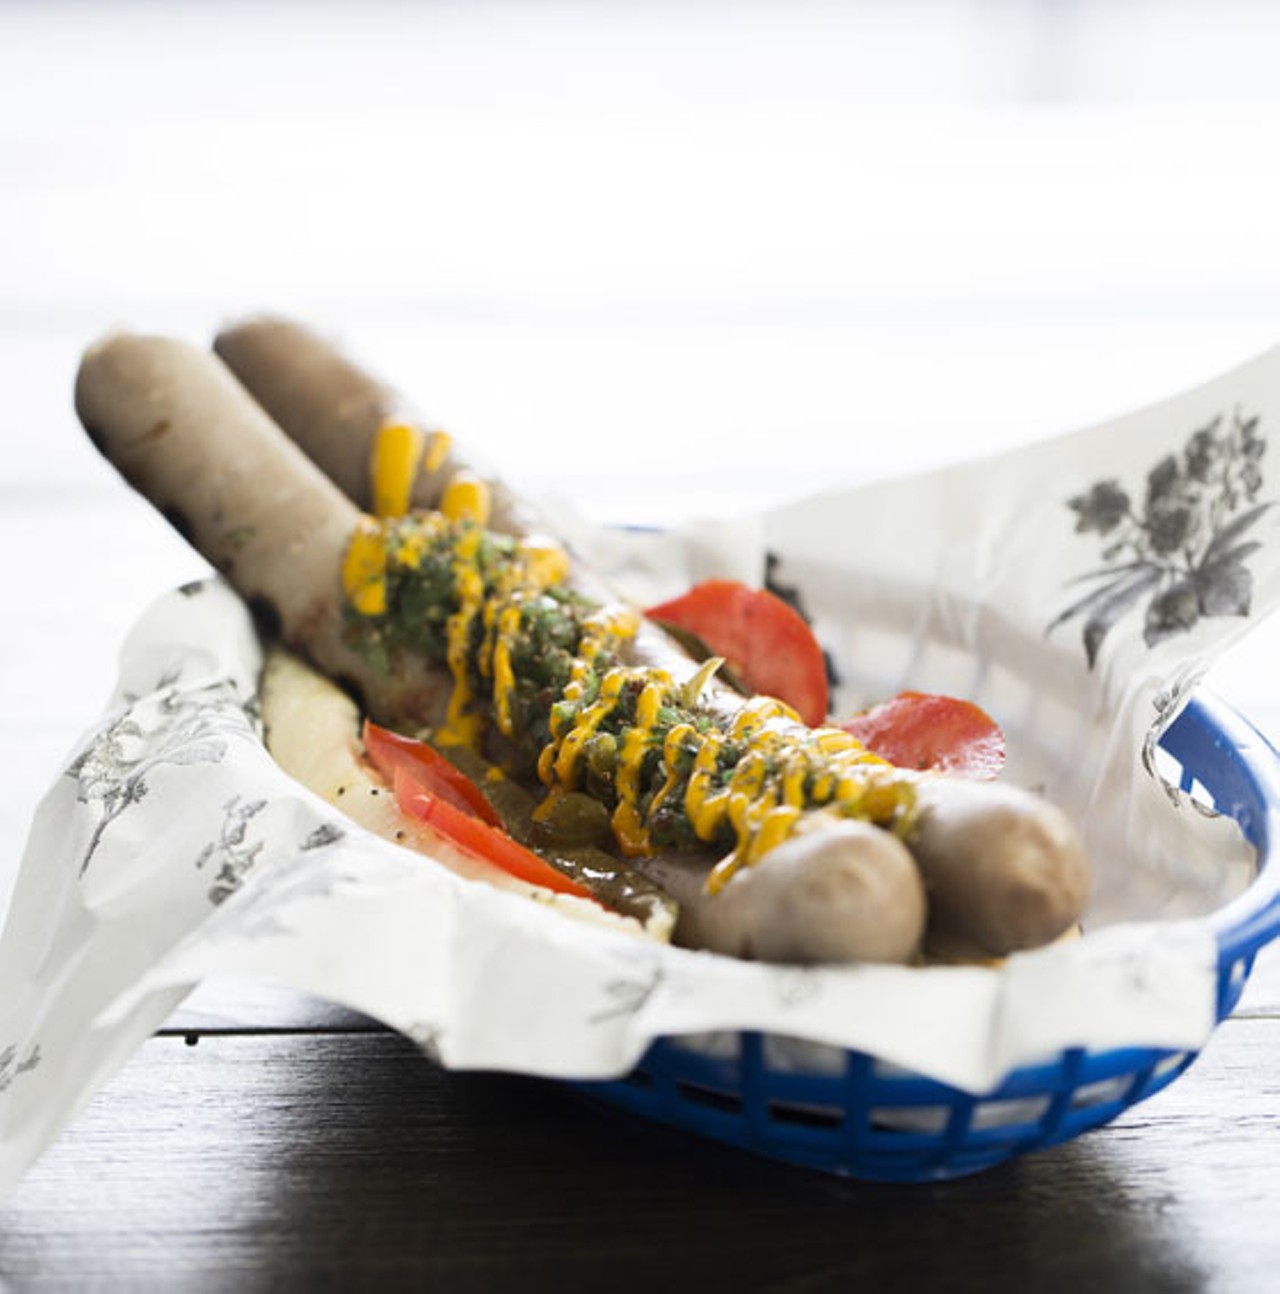 Housemade all-beef hot dog nestled in a poppy-seed bun and topped with yellow mustard, tomato, green relish, spicy peppers.